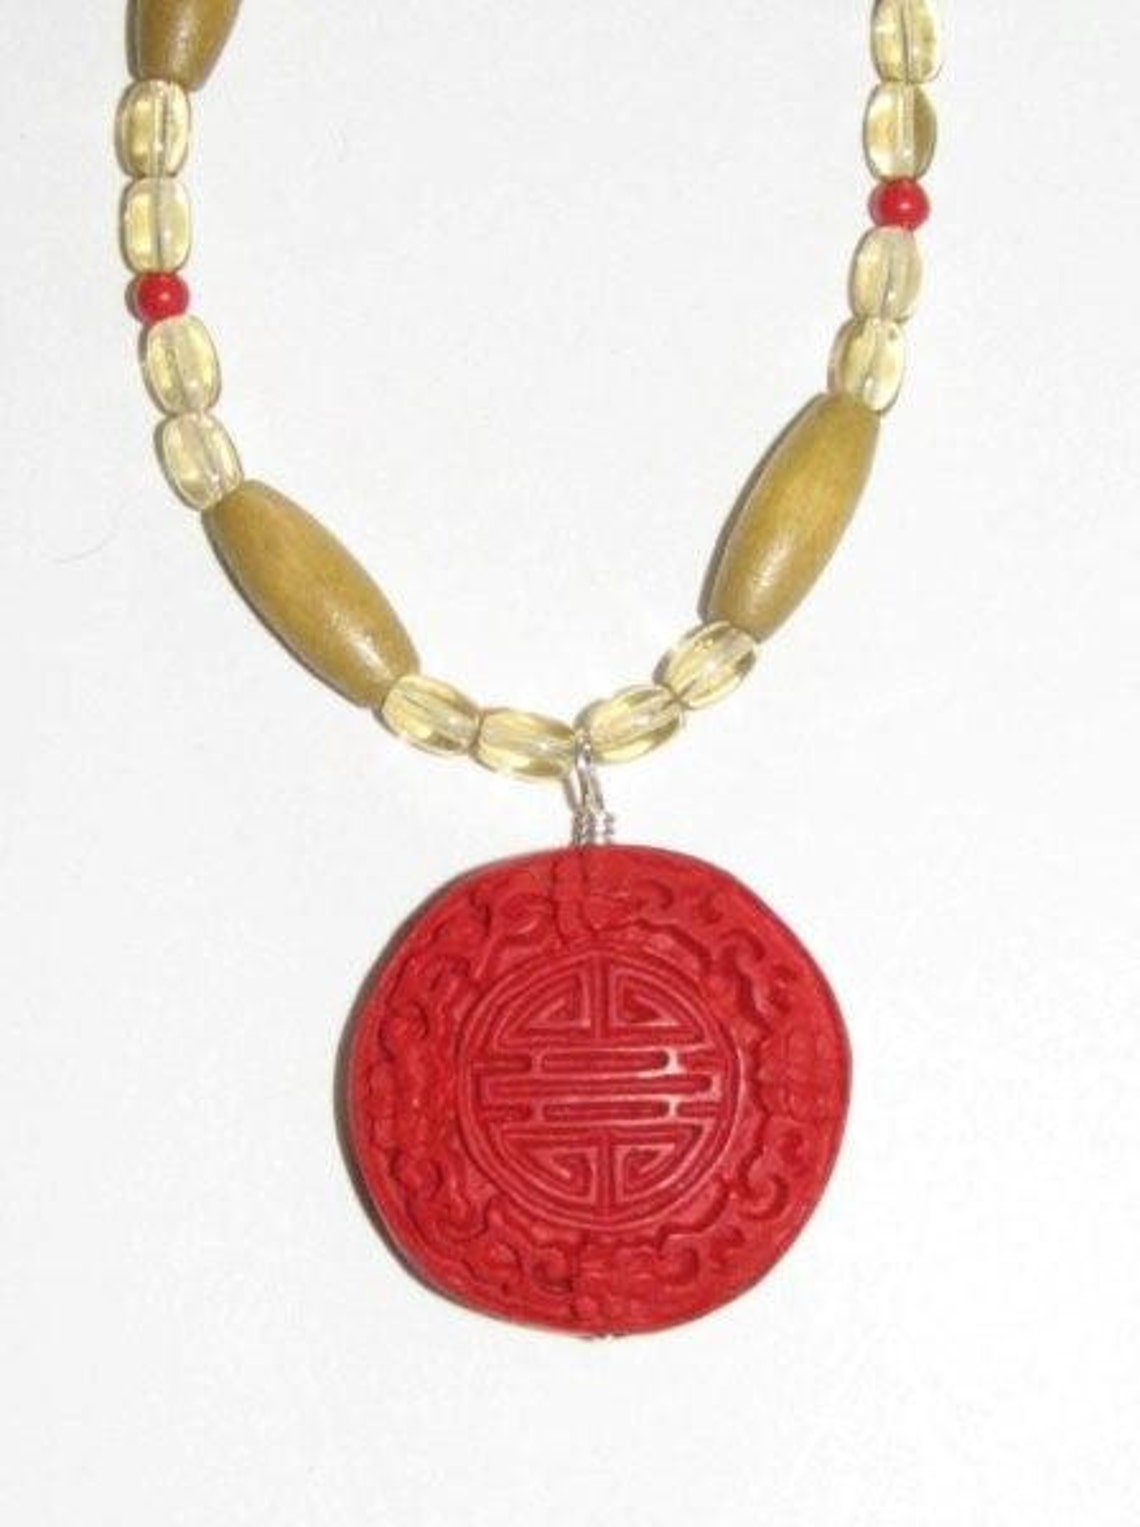 Asian design red round carved pendant necklace | Etsy